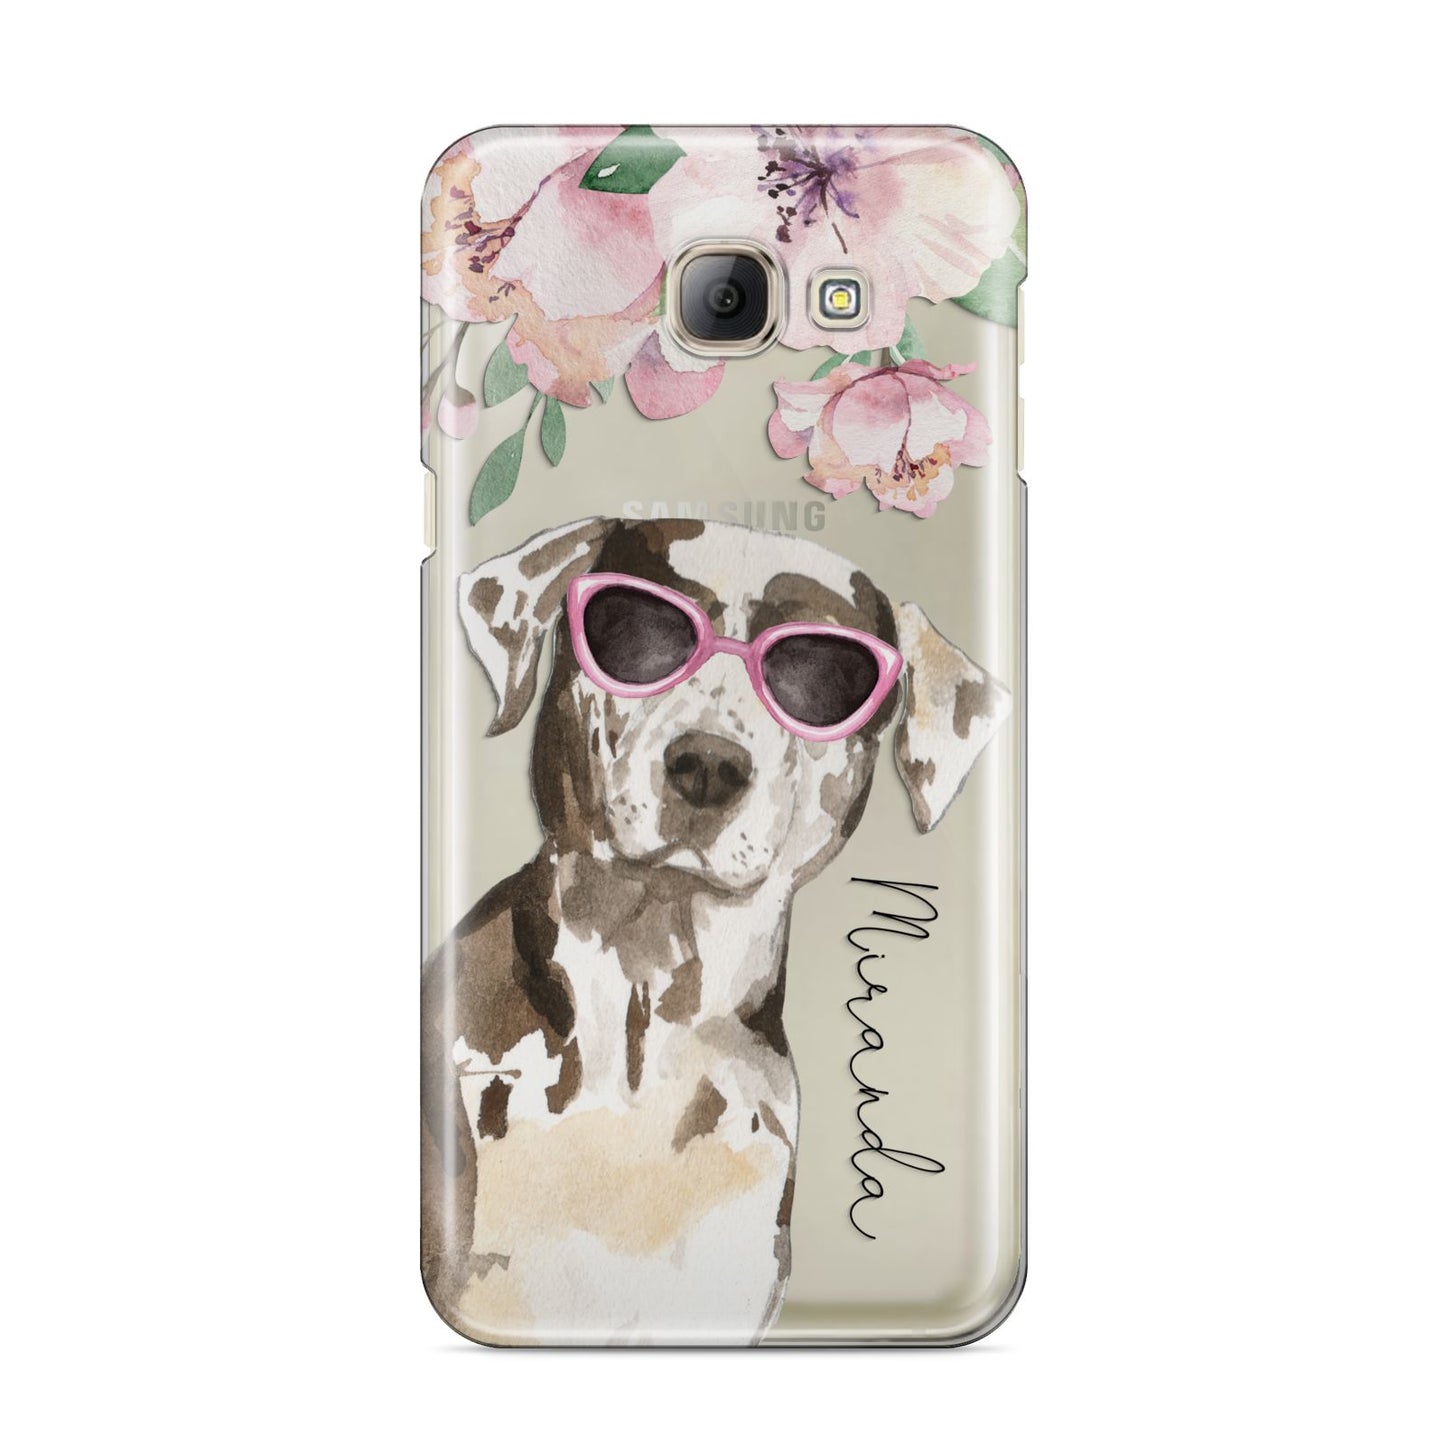 Personalised Catahoula Leopard Dog Samsung Galaxy A8 2016 Case